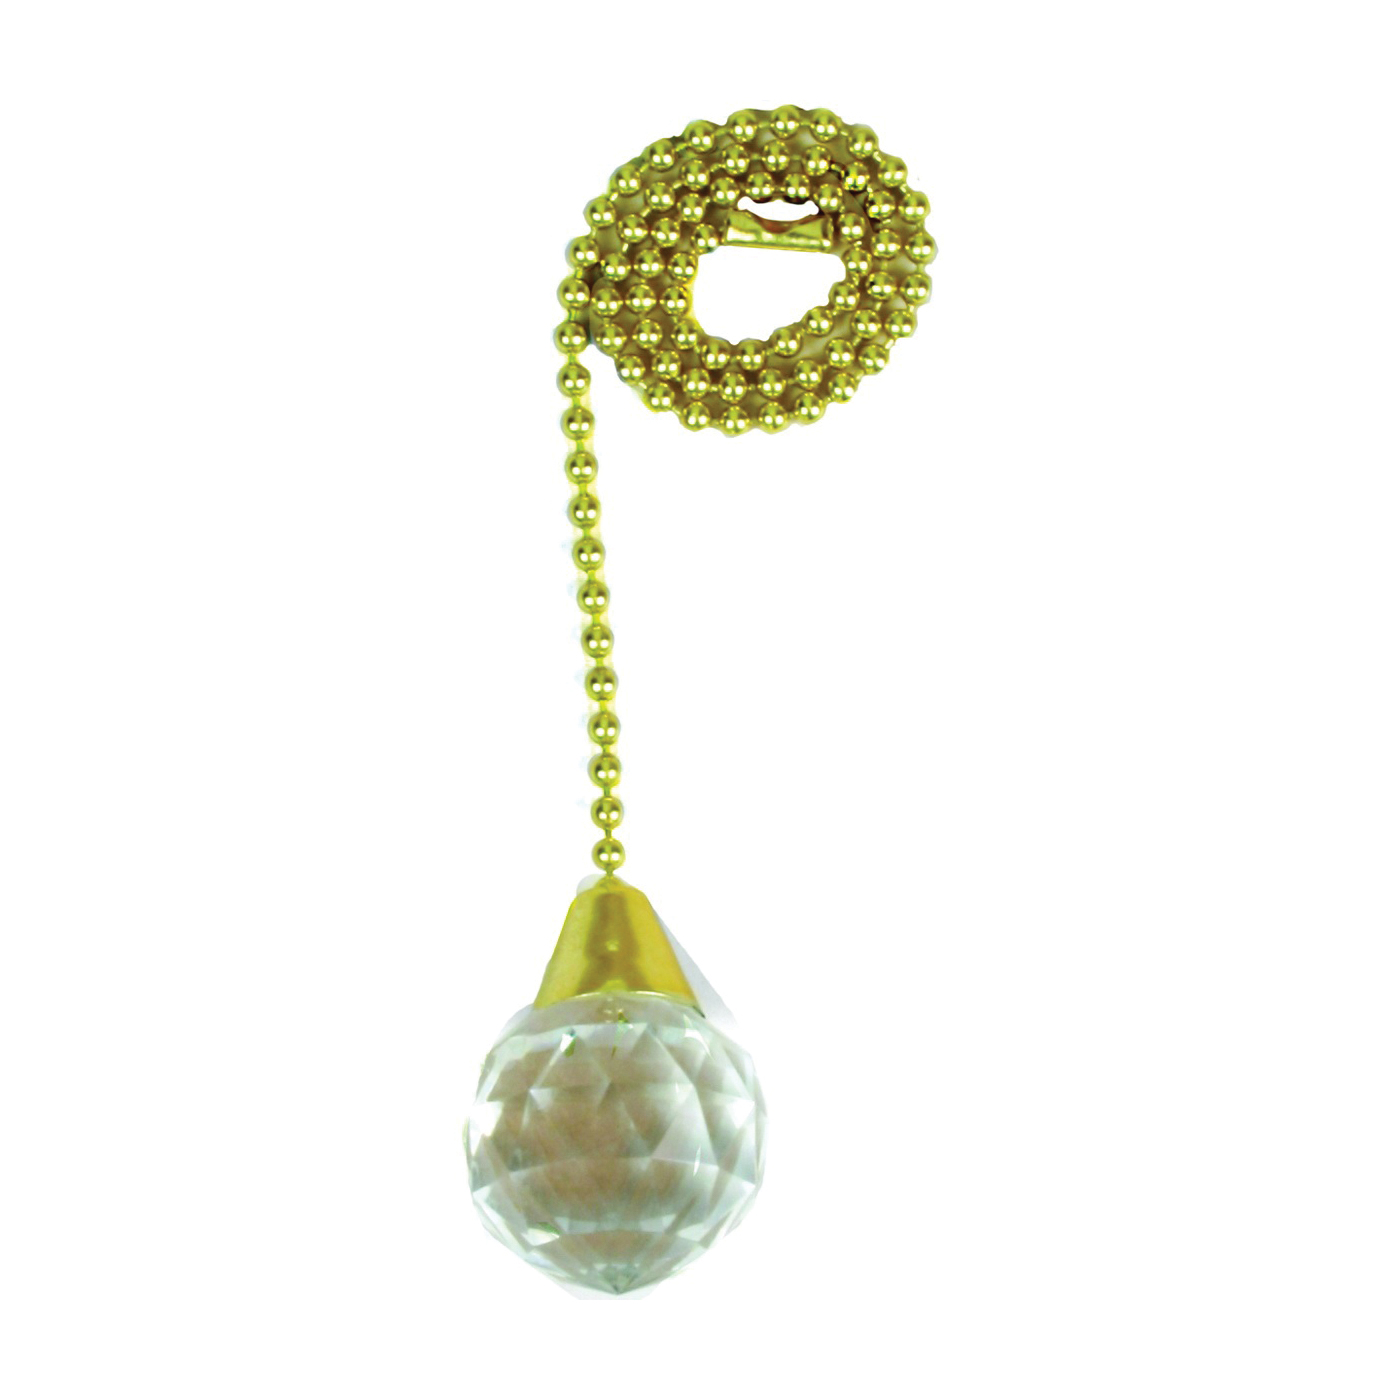 60320 Acrylic Sphere Pull Chain, 12 in L Chain, Solid Brass